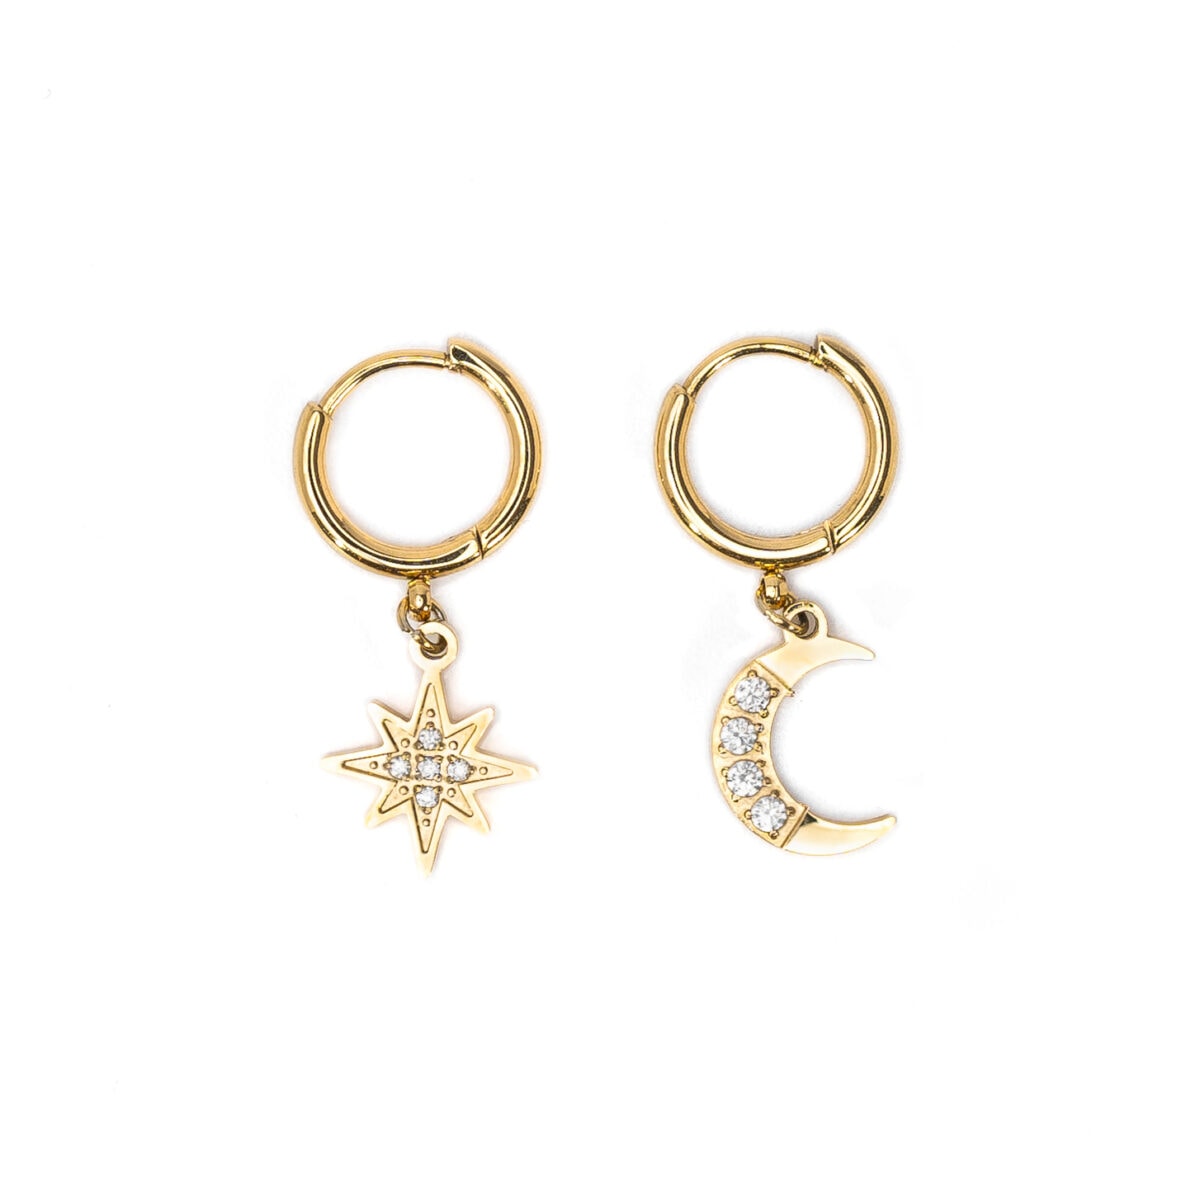 https://m.clubbella.co/product/18k-gold-plated-symbolic-asymmetrical-earrings/ Resized (21 of 134)